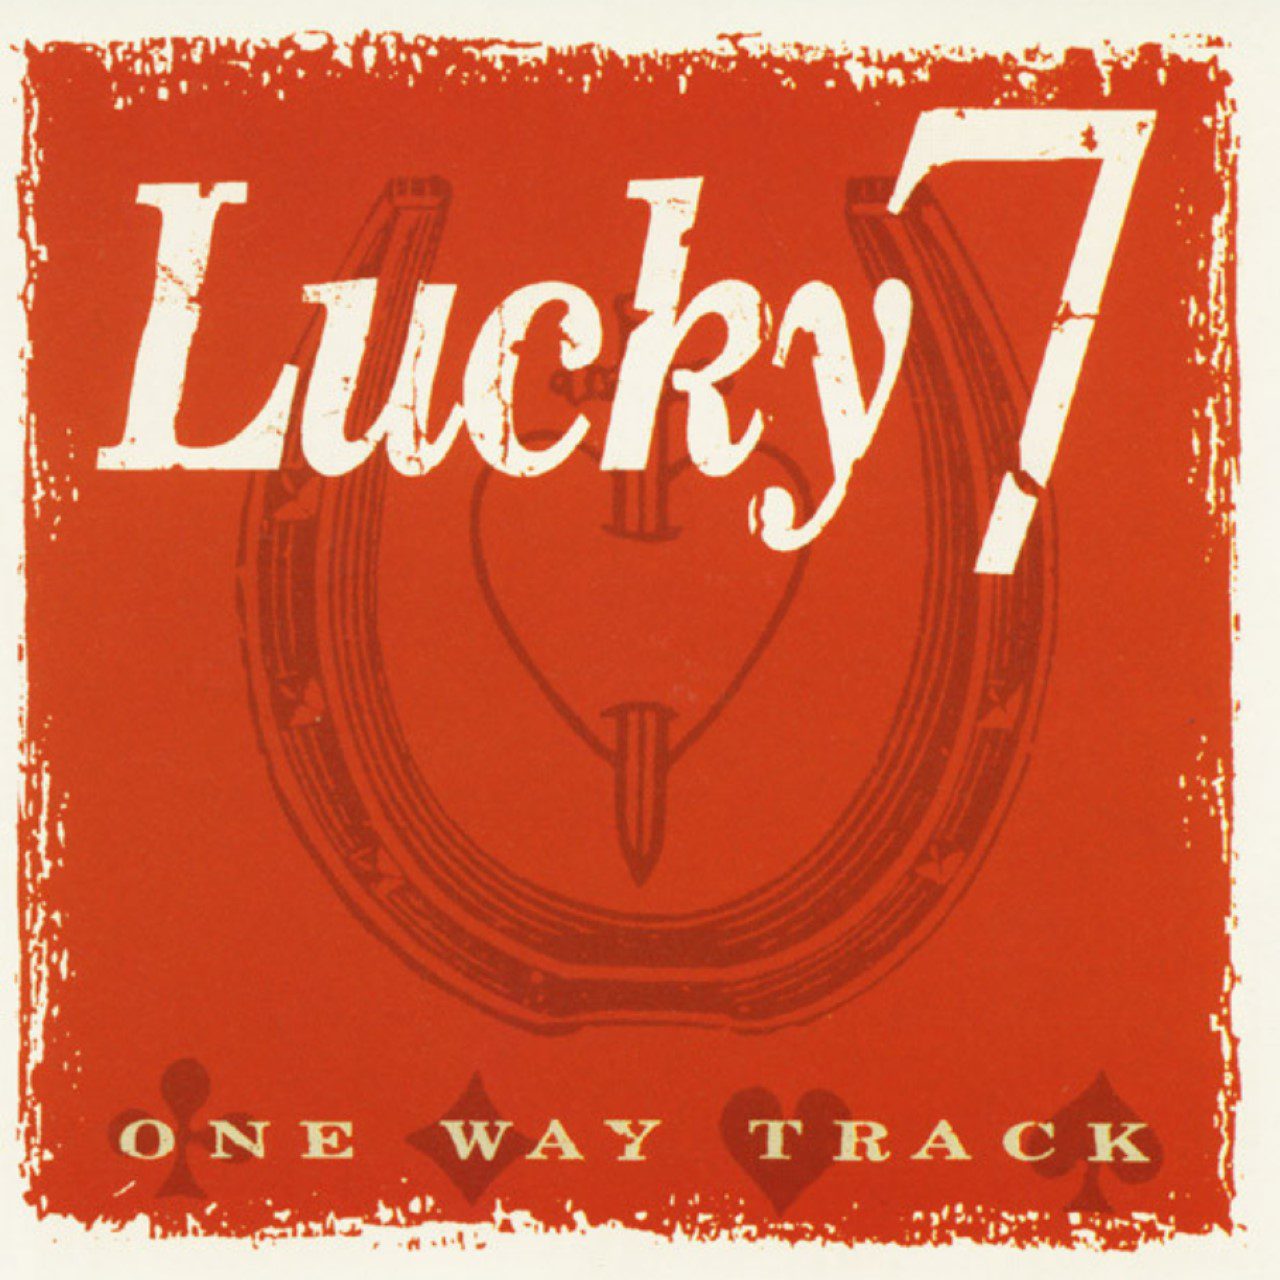 Lucky 7 – One Way Track cover album